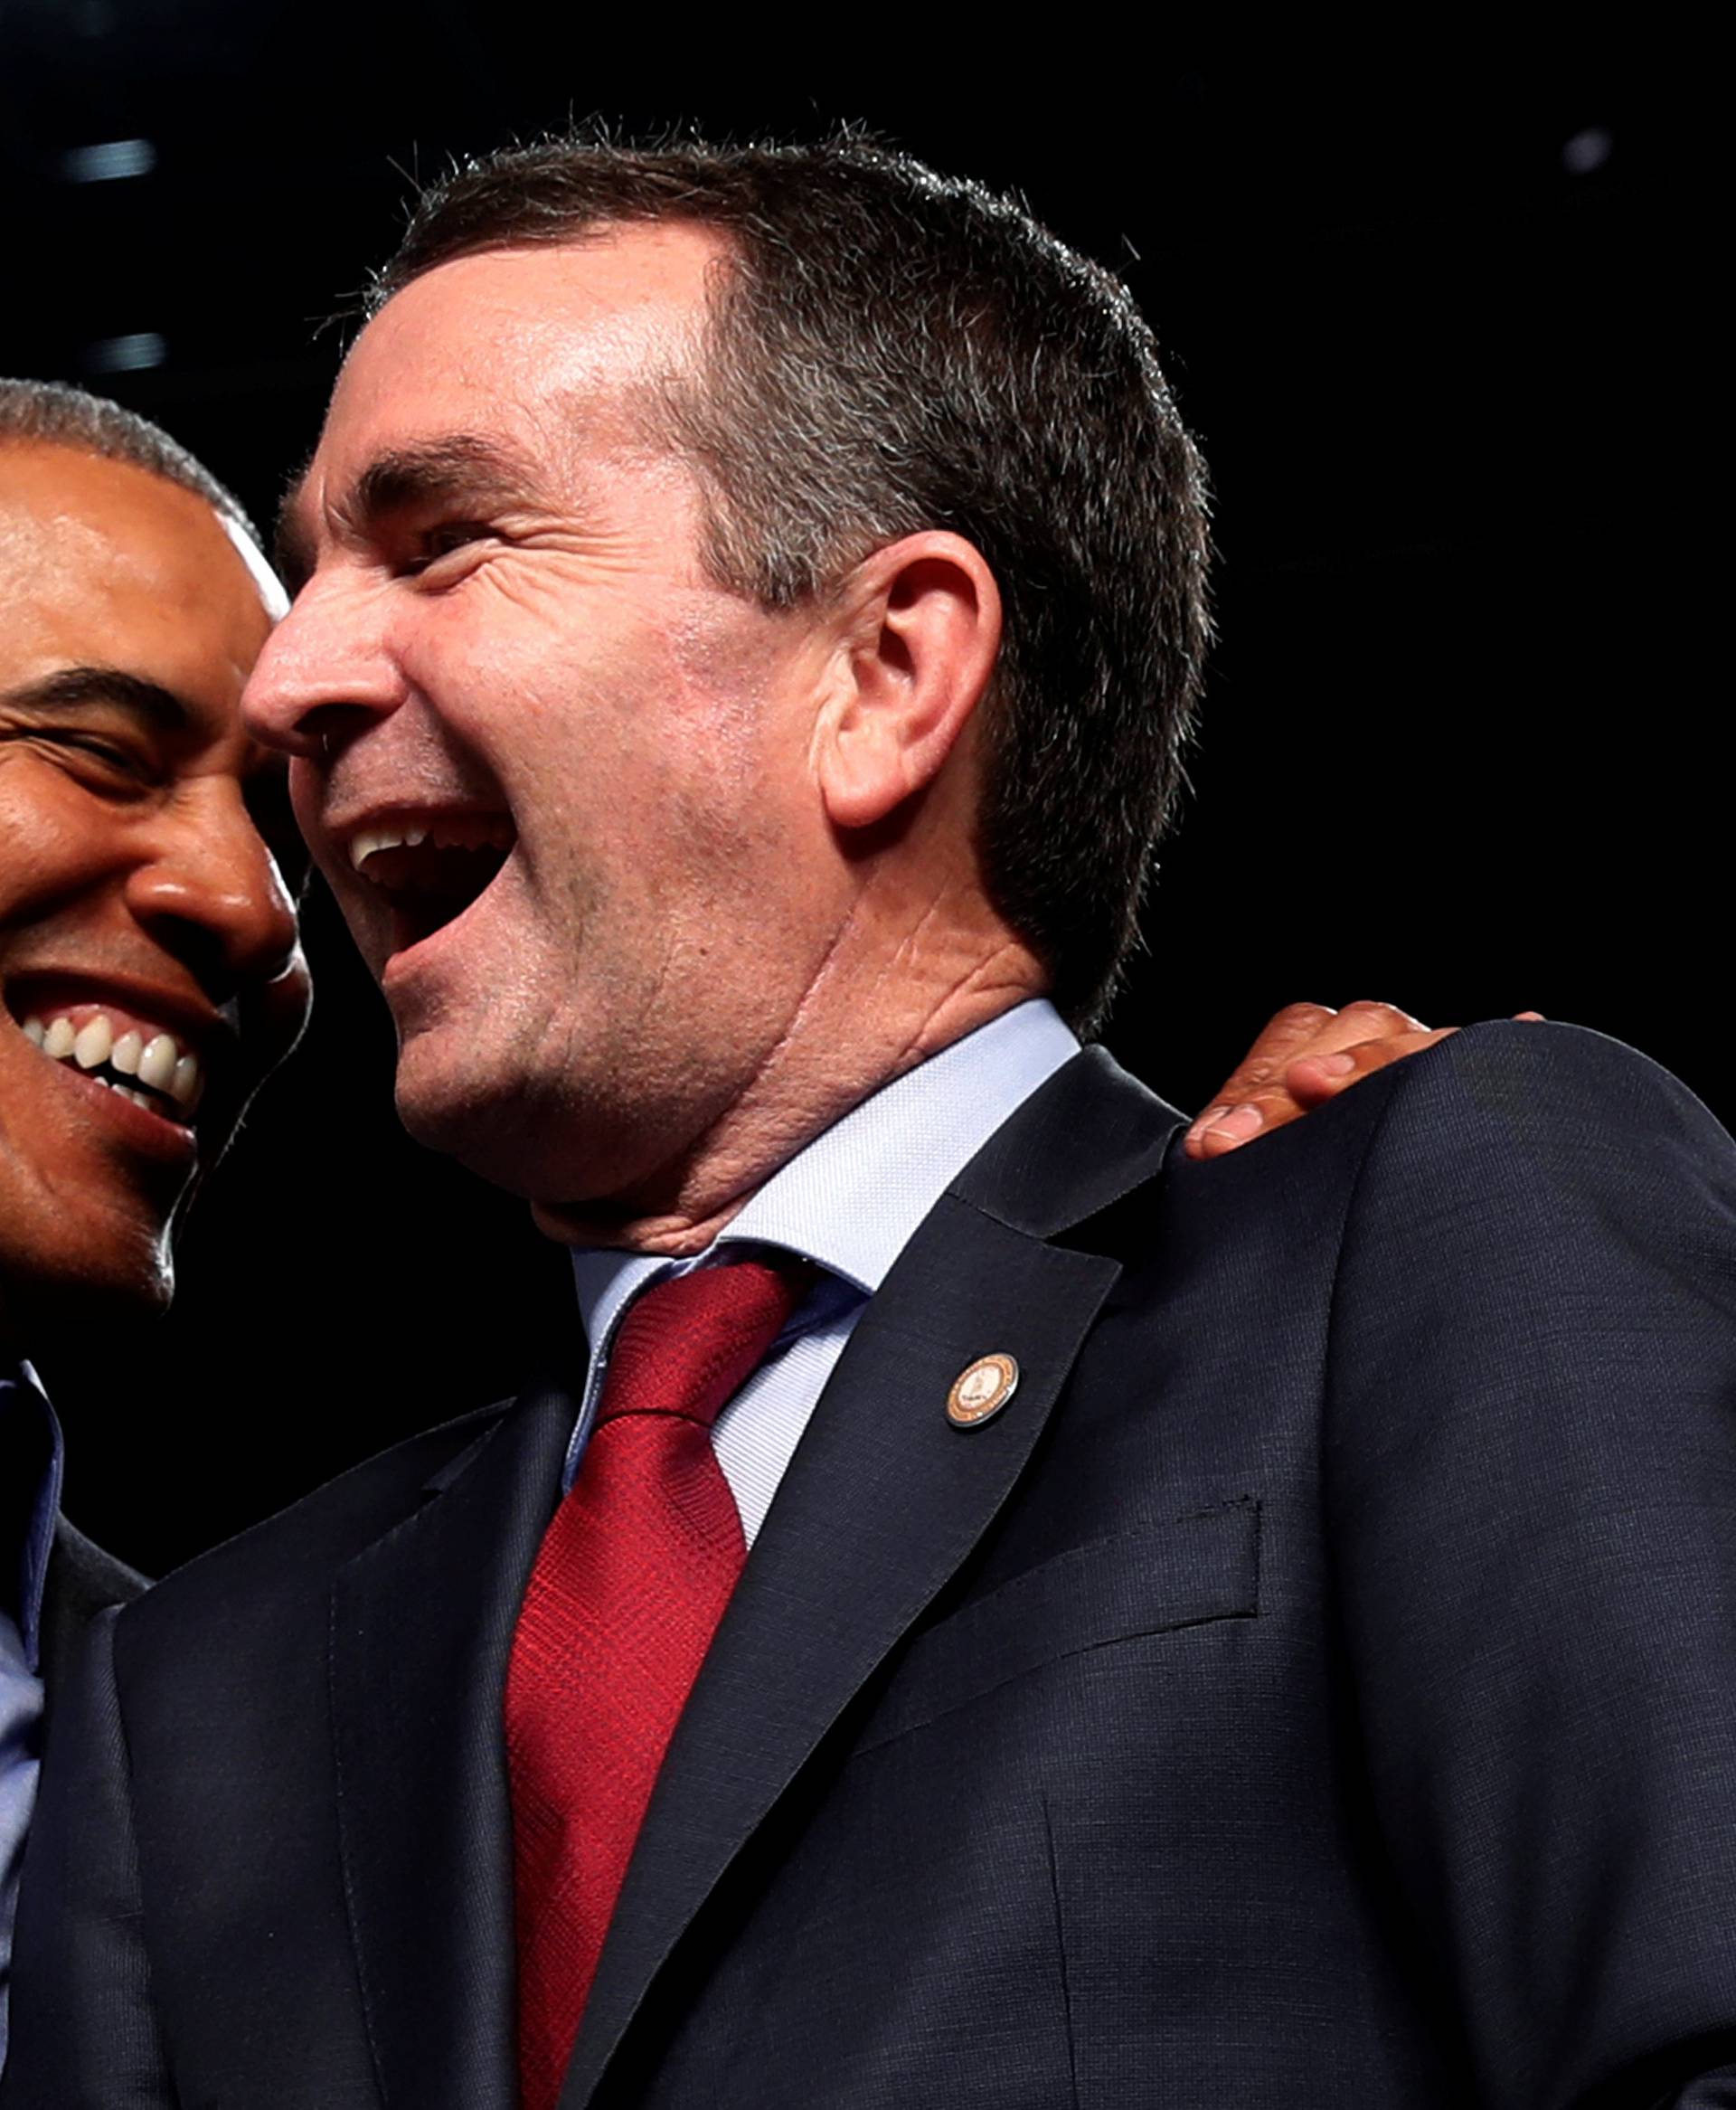 Obama campaigns in support of Northam at a rally with supporters in Richmond, Virginia